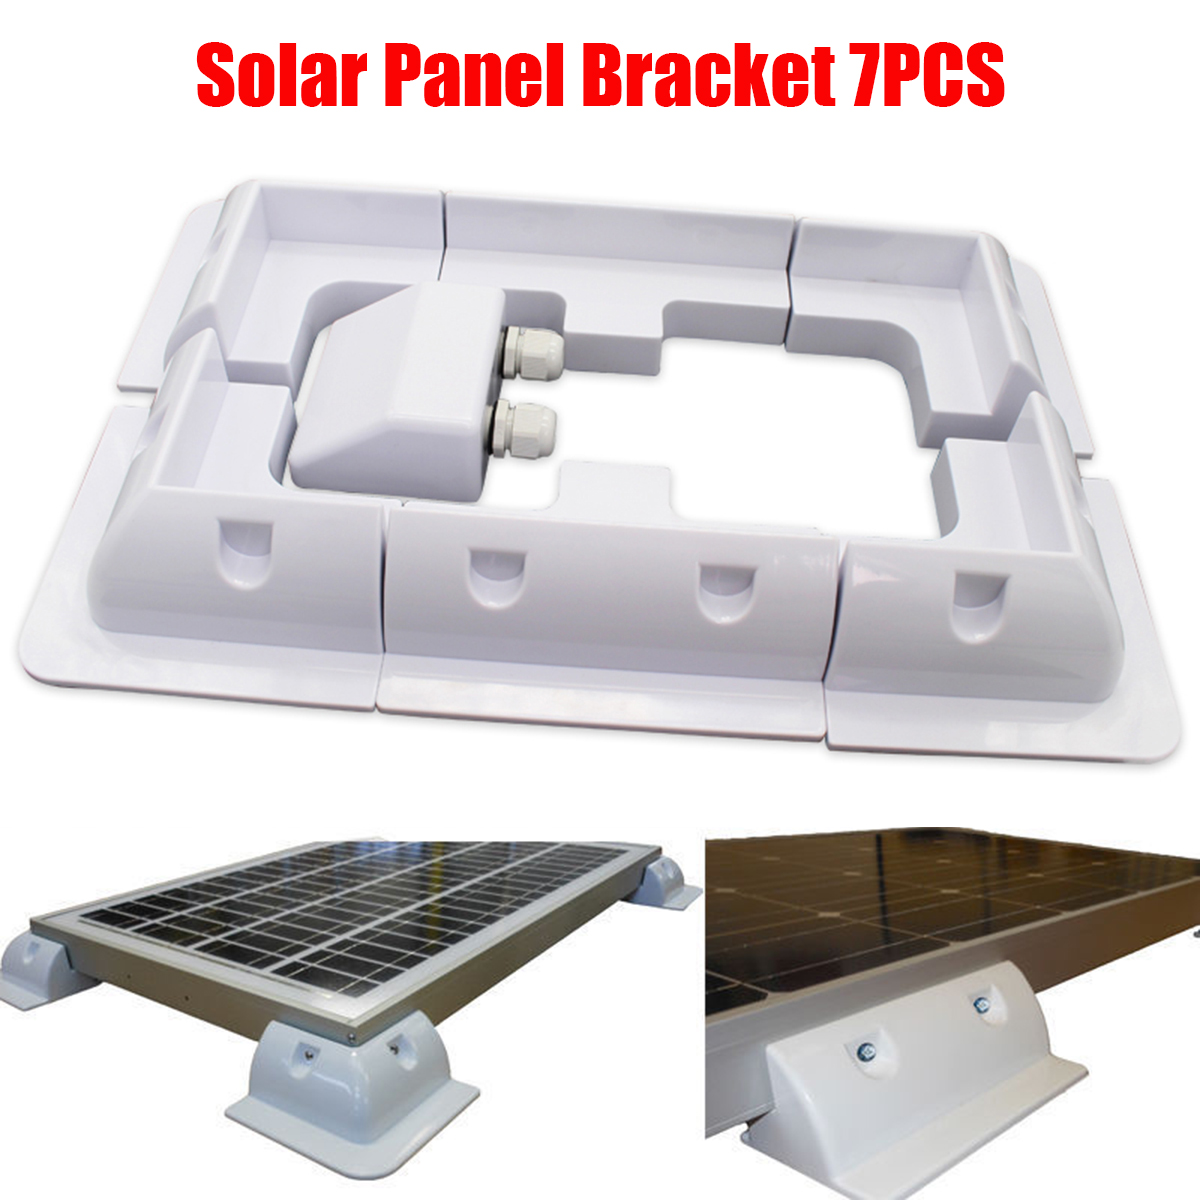 7PCS-ABS-Solar-Panel-Mounting-Bracket-Kits-Cable-Entry-Gand-for-Caravan-Motorhome-RV-1446142-1